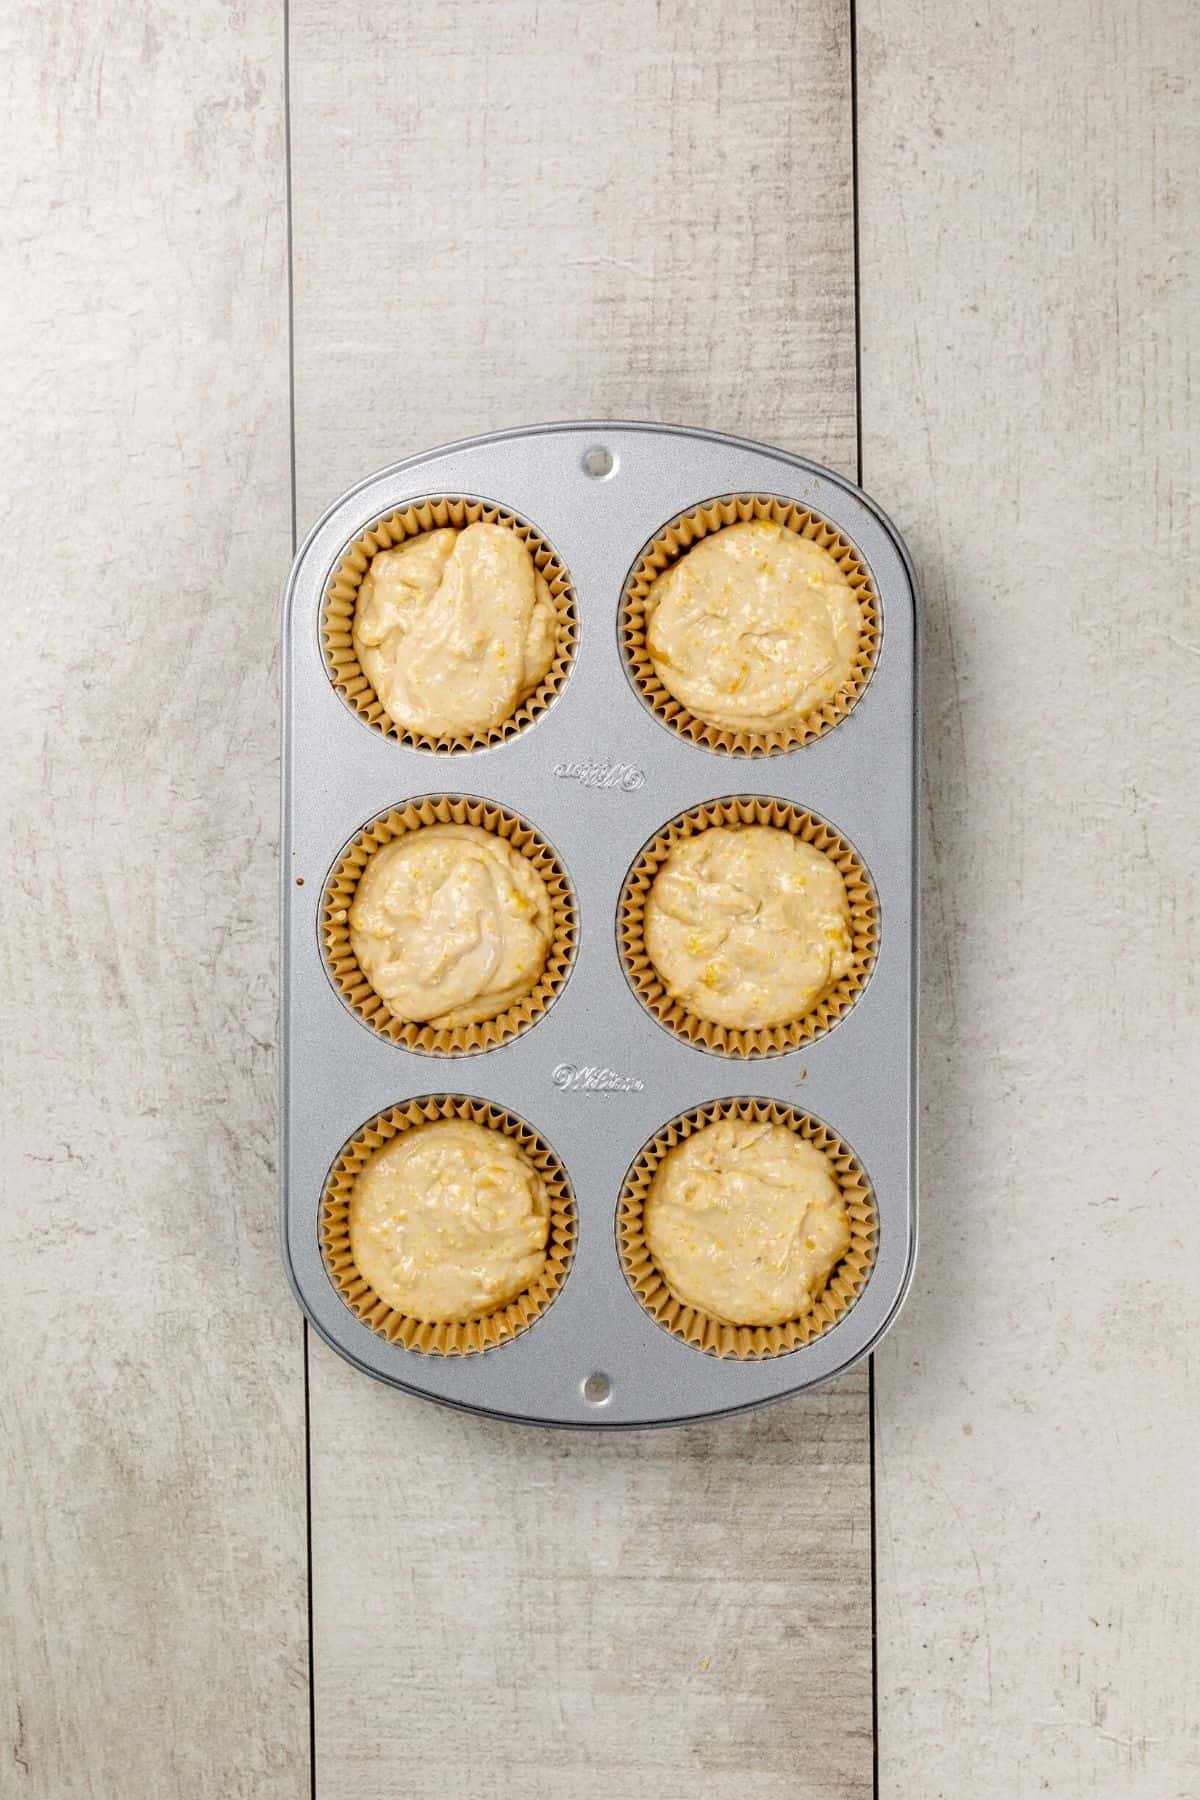 6 unbaked cornbread muffins in a muffin tray.